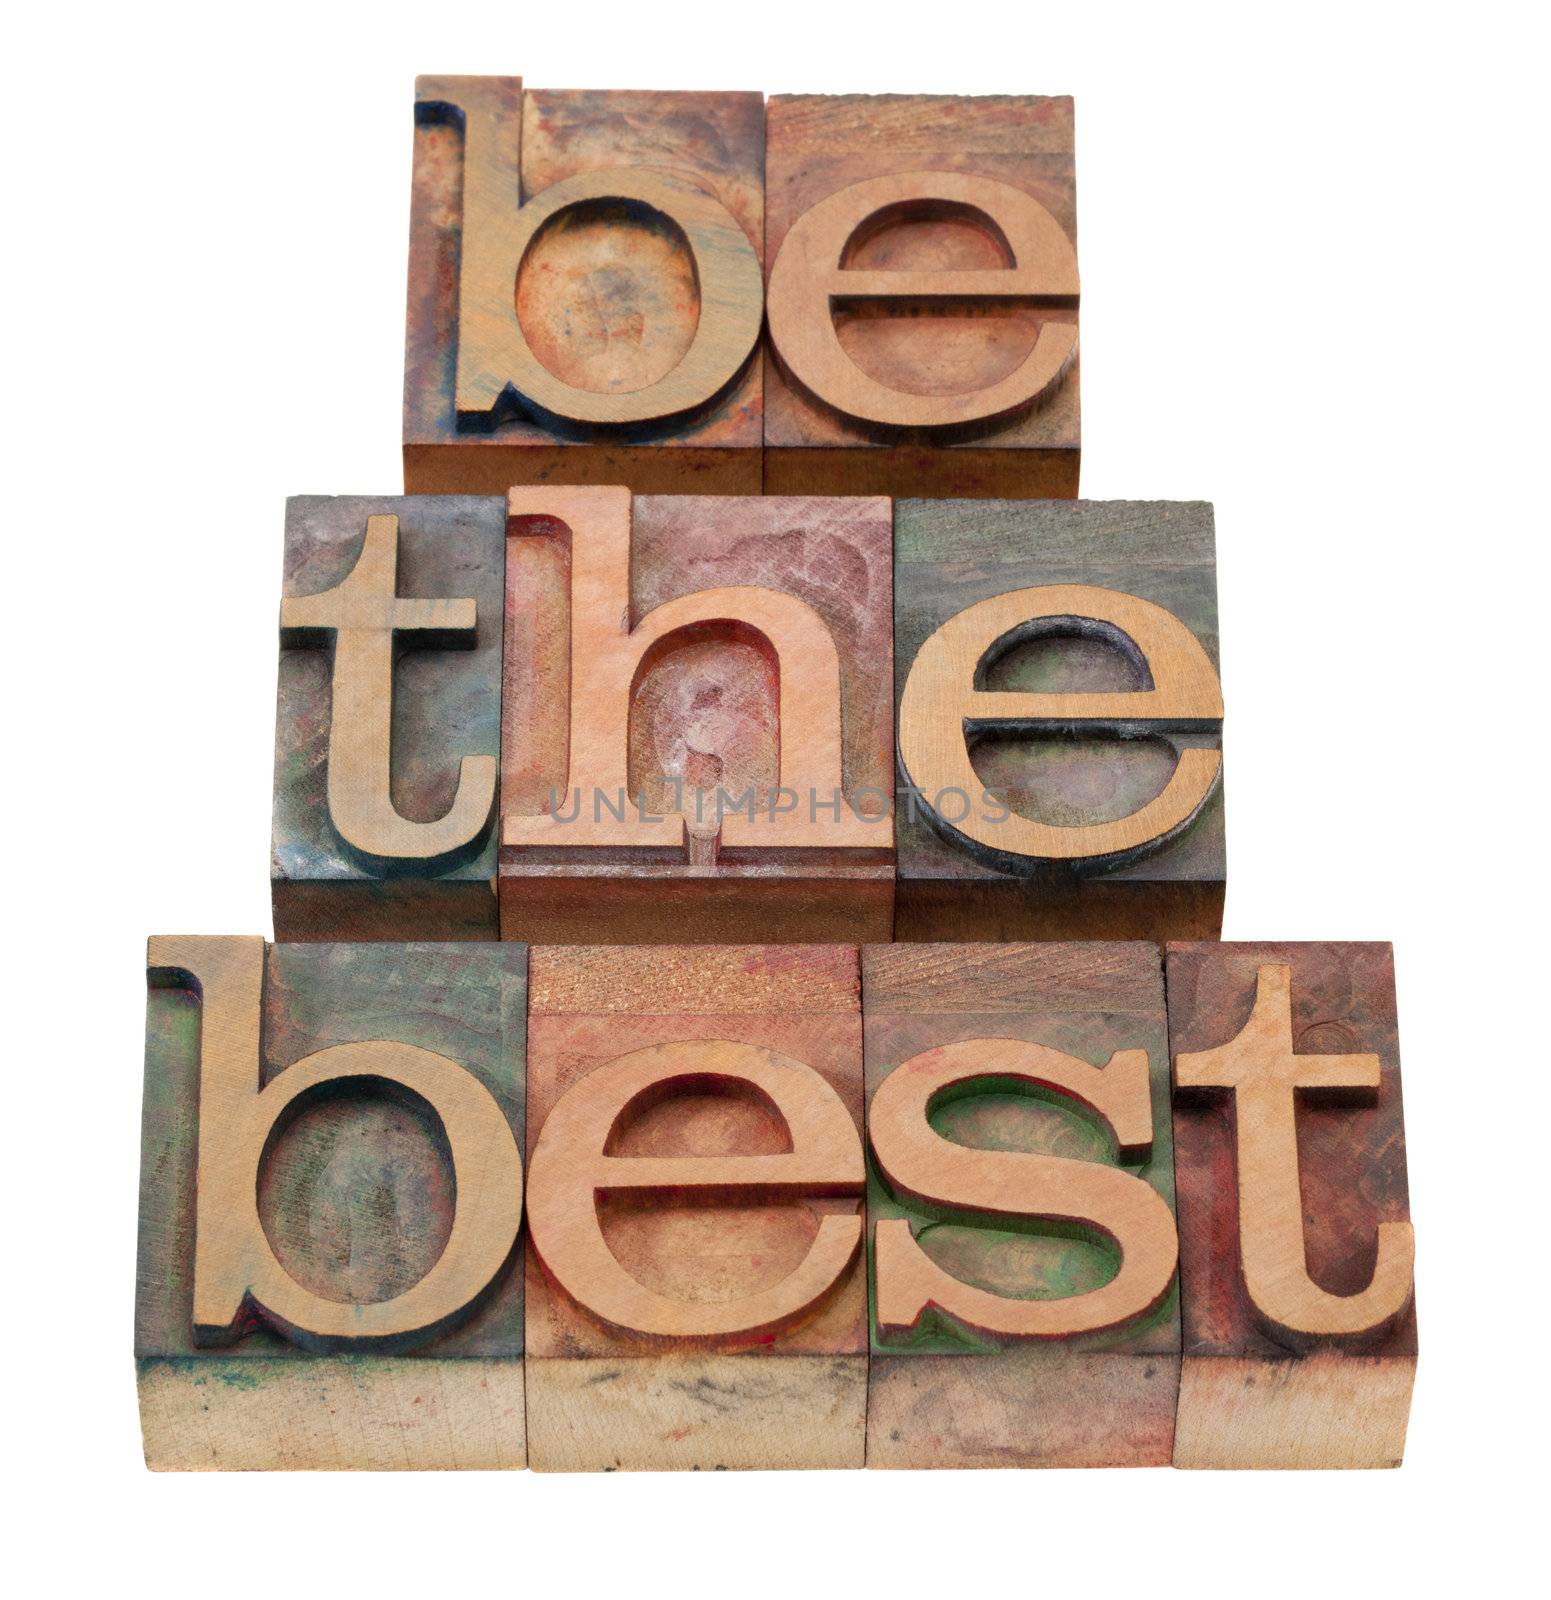 be the best - slogan in vintage wooden letterpress prititng blocks, stained by color inks, isolated on white